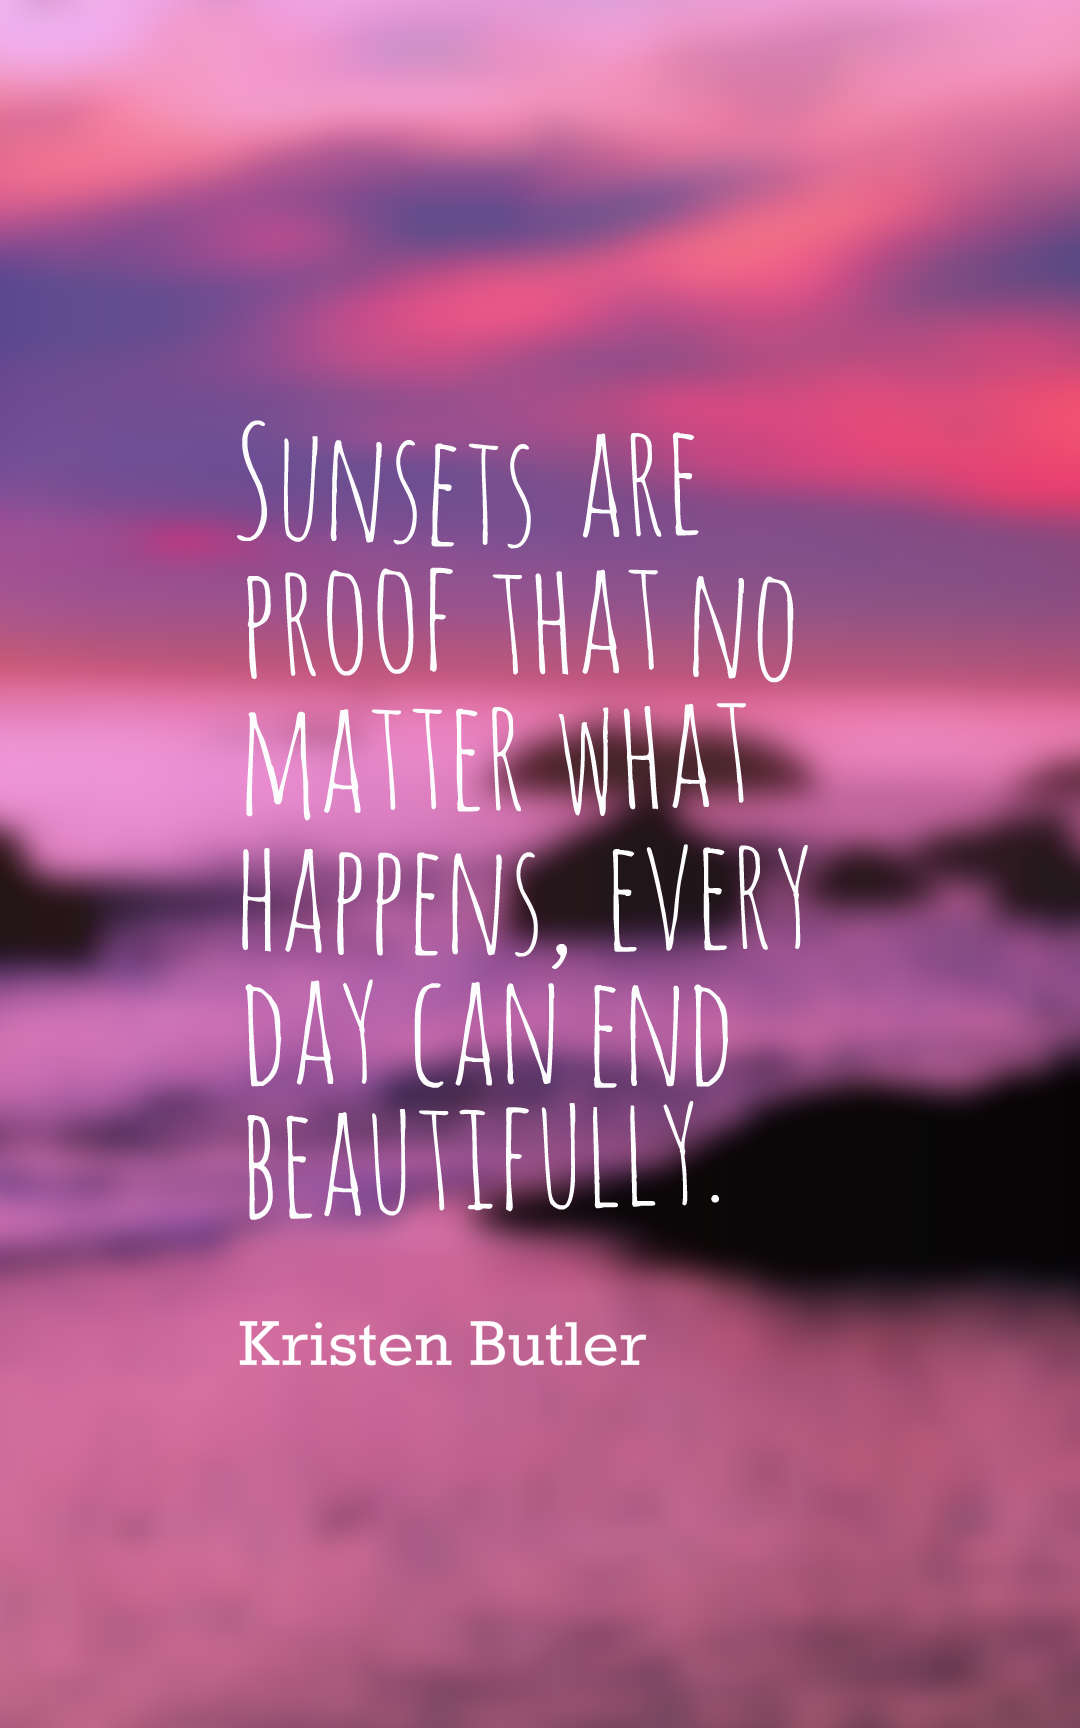 Sunsets are proof that no matter what happens, every day can end beautifully.